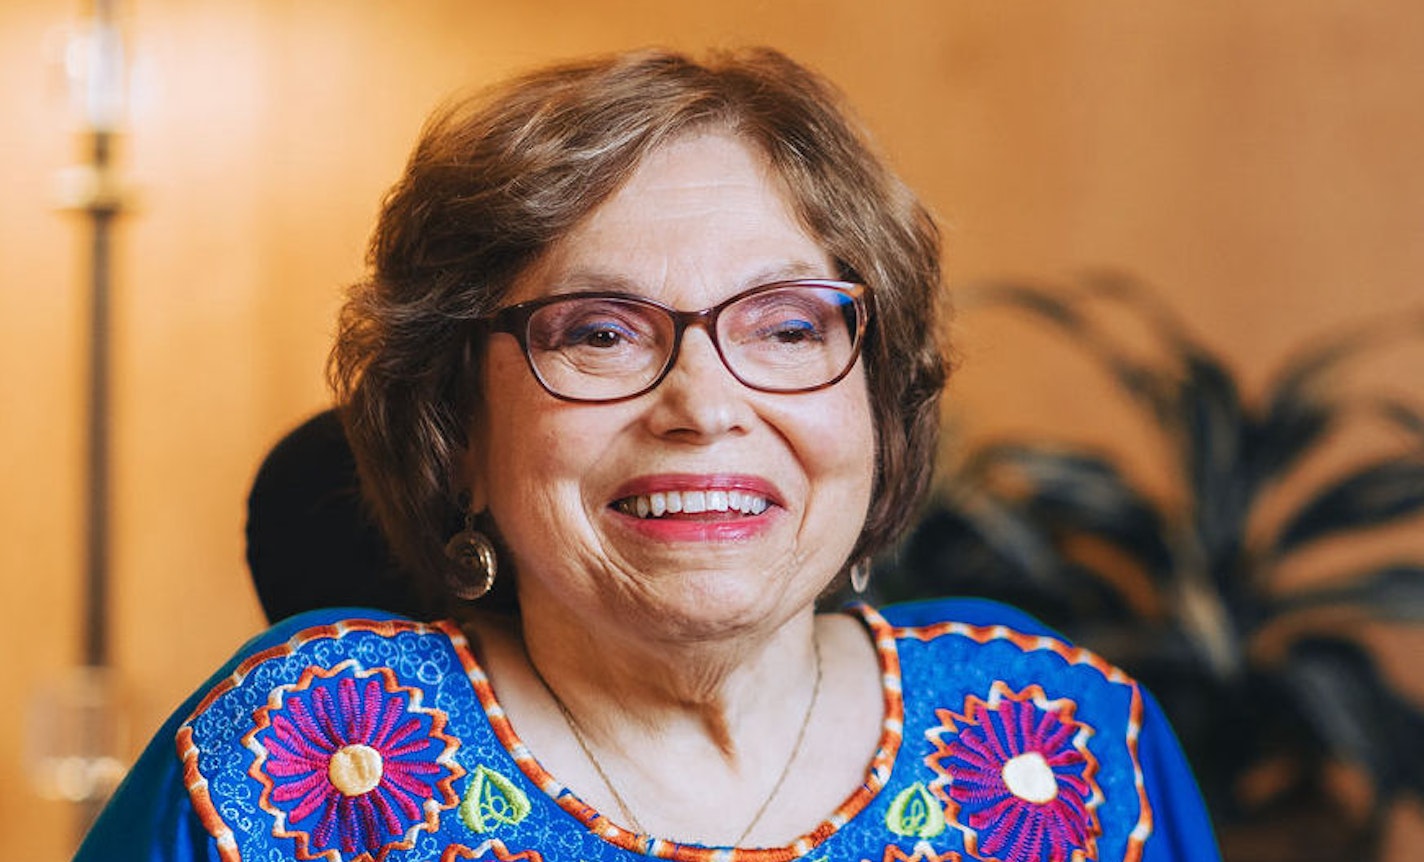 Reimagine Candlelight Vigil with "The Mother of Disability Rights" Judy Heumann